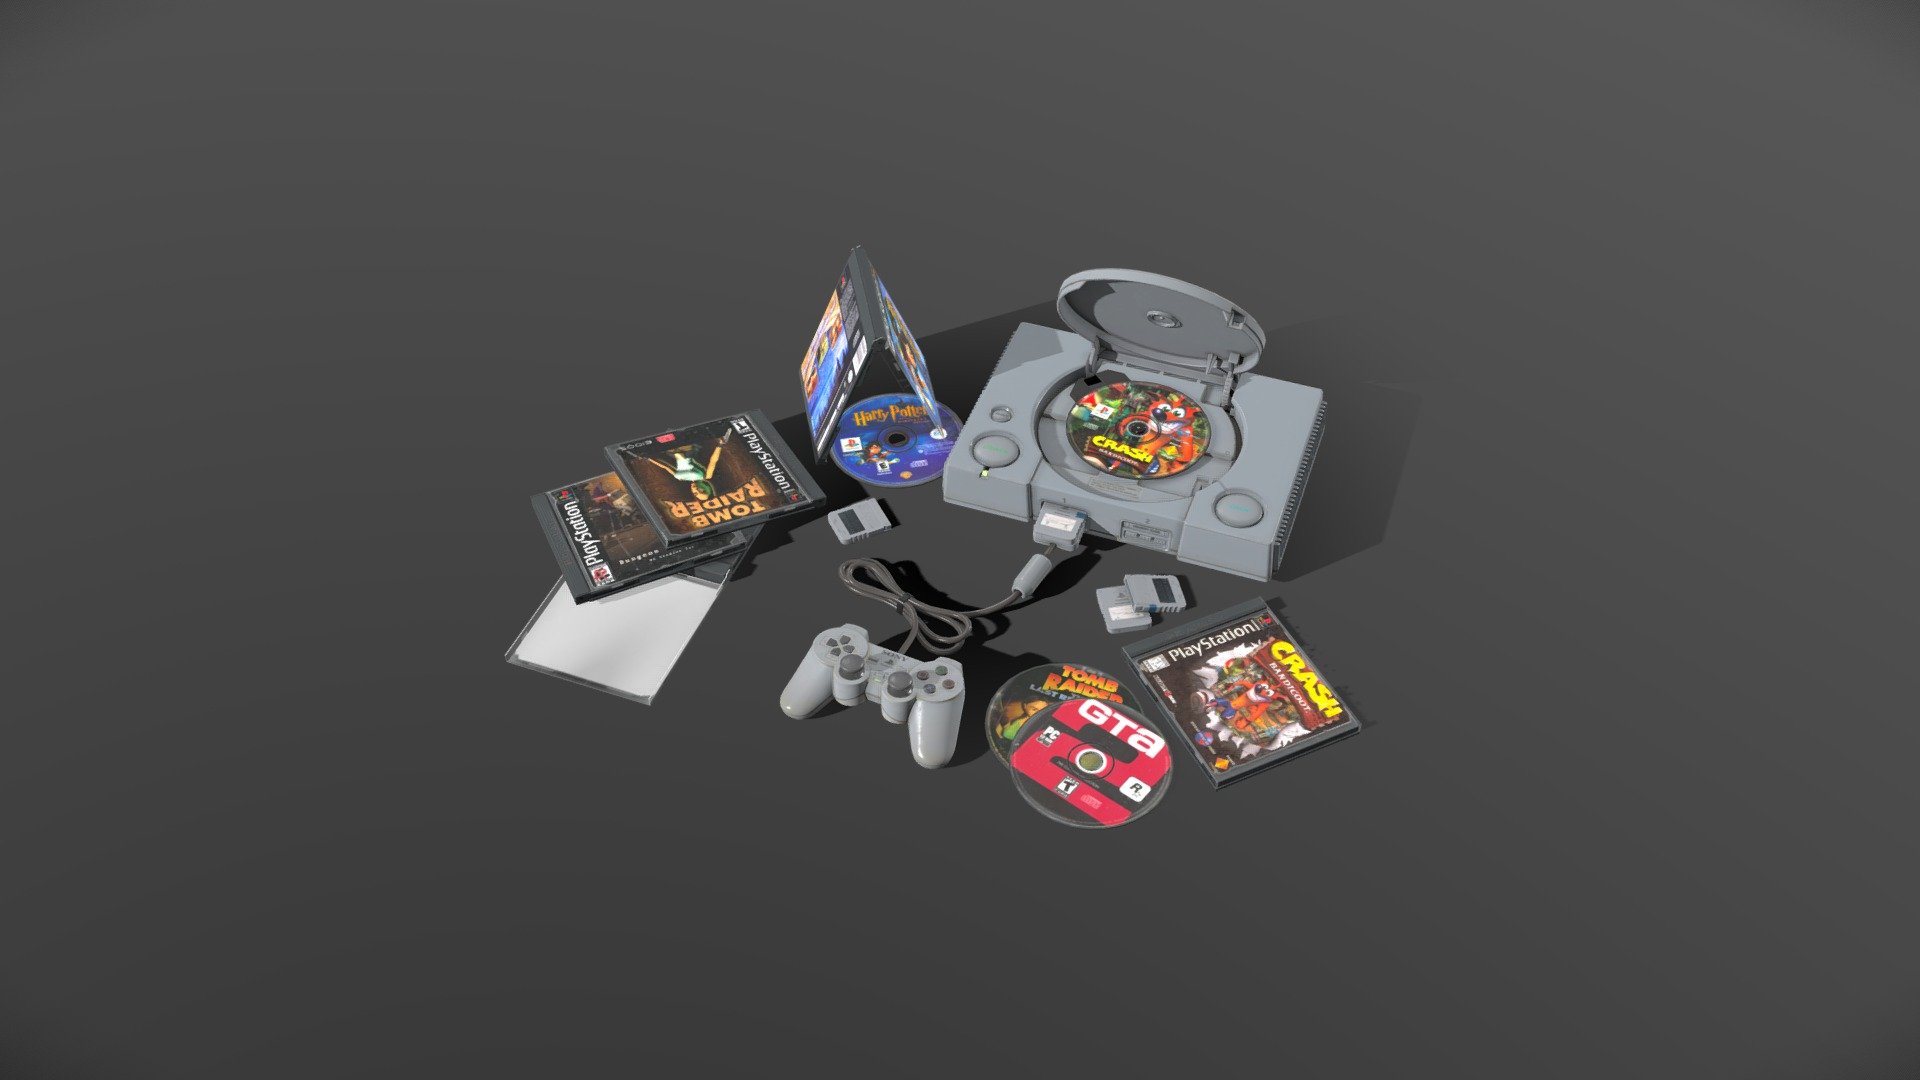 Playstation 1, Controller, CD boxes, Memory card, wire.






Console:           Vertices 14311  Triangles 13980





CD box:             Vertices 783      Triangles 882





Memory Card:  Vertices 340      Triangles 308





Wire:                 Vertices 2052    Triangles 2856




PBR Material: Base_Color, Metallic, Mixed_AO, Normal map, Opacity, Roughness;

Texture res: 4096x4096;
 - Playstation 1 and Controller DualShock 1 - 3D model by krittsky 3d model